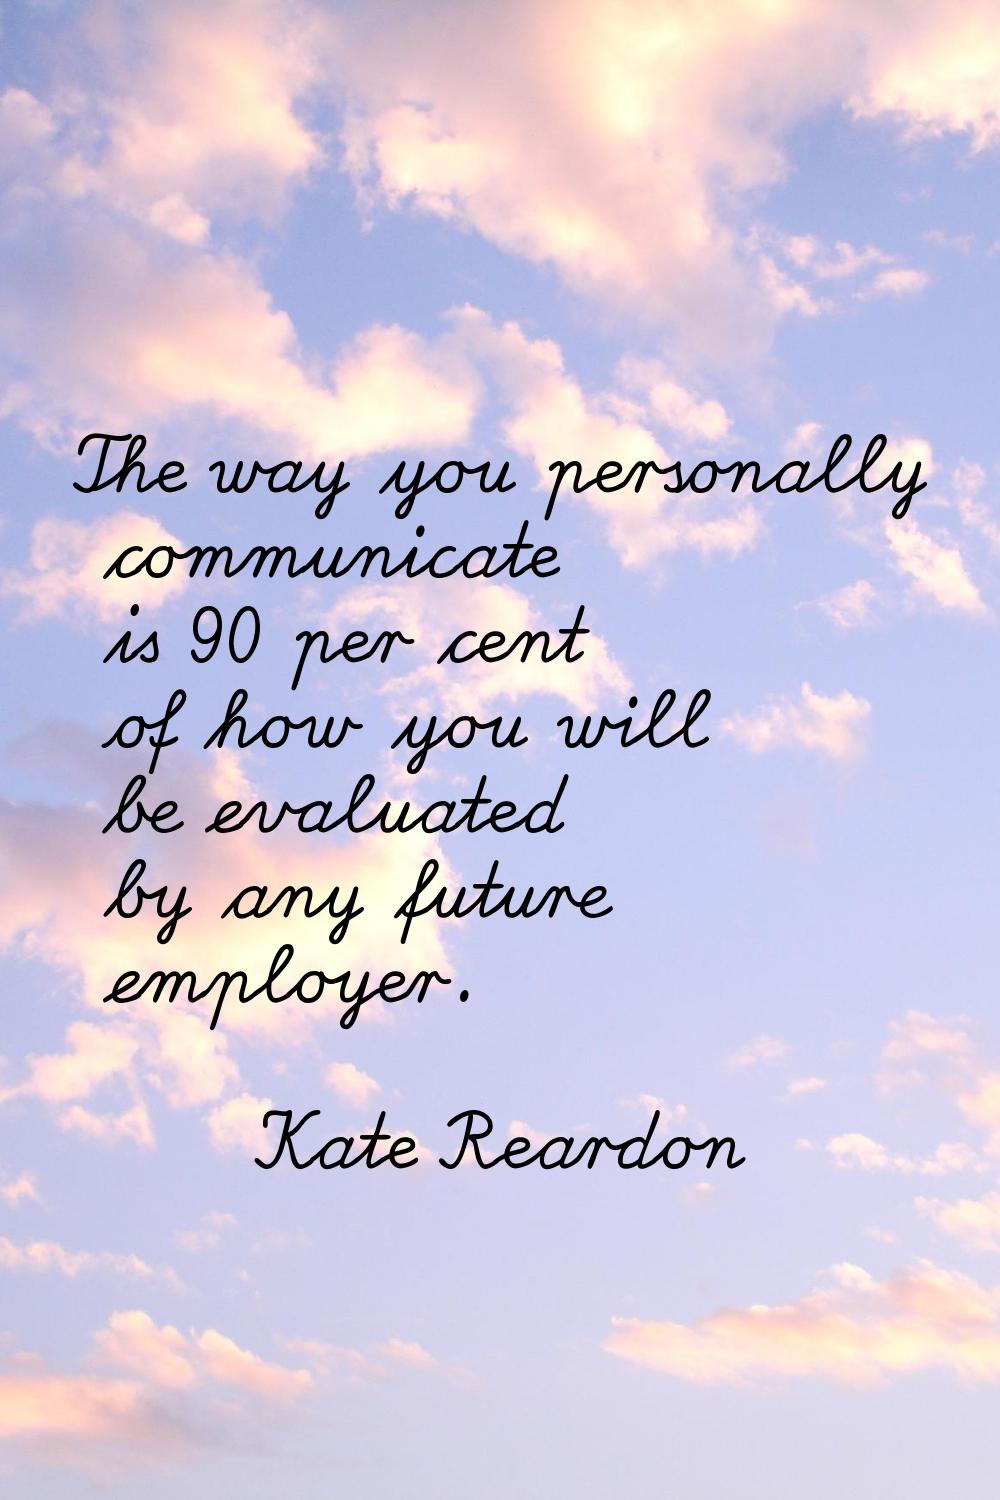 The way you personally communicate is 90 per cent of how you will be evaluated by any future employ